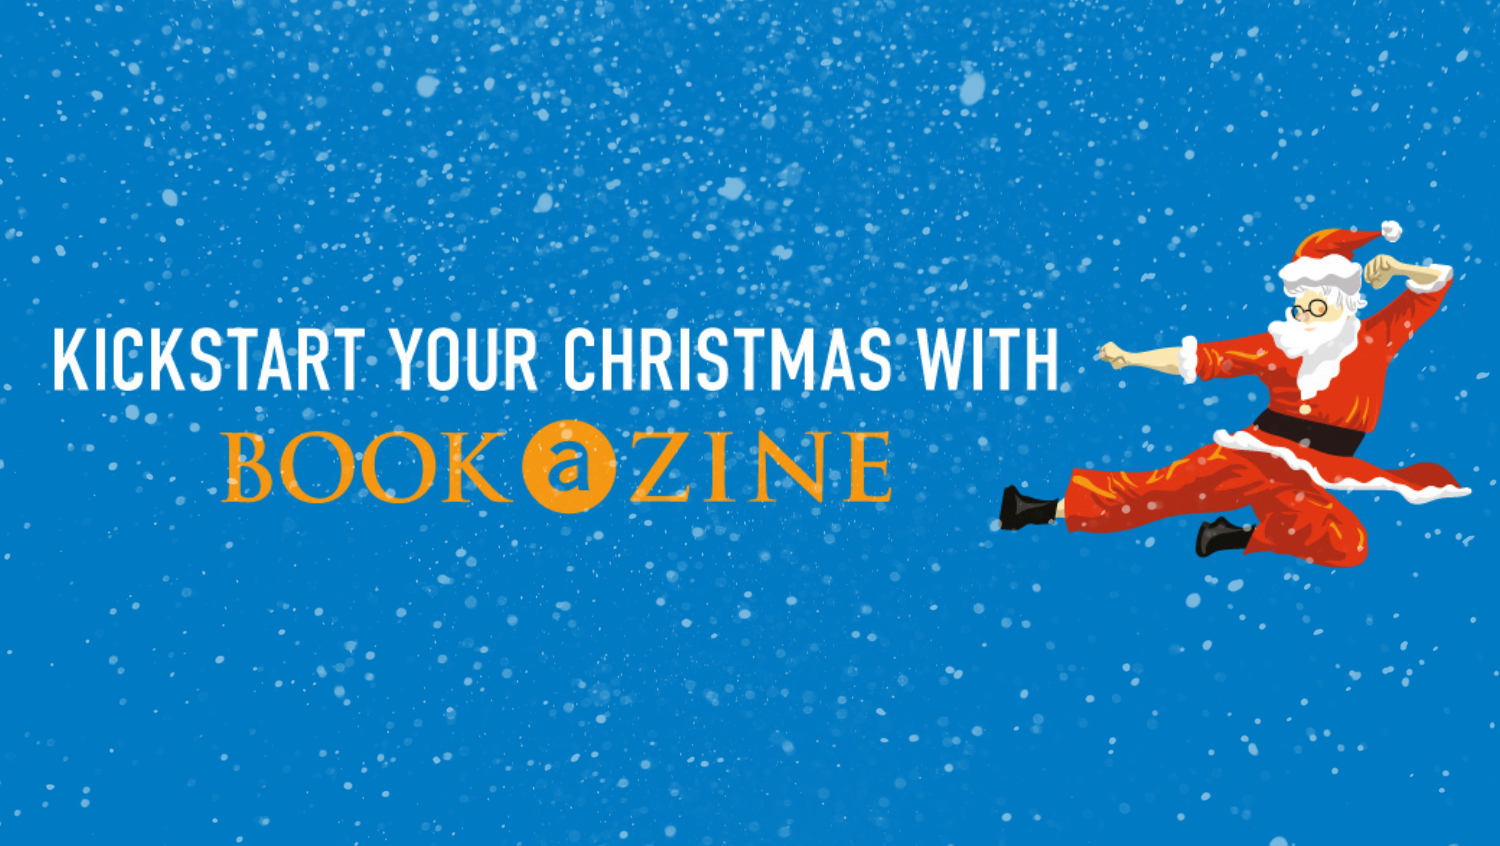 It's Time To Kickstart Your Christmas With Bookazine!